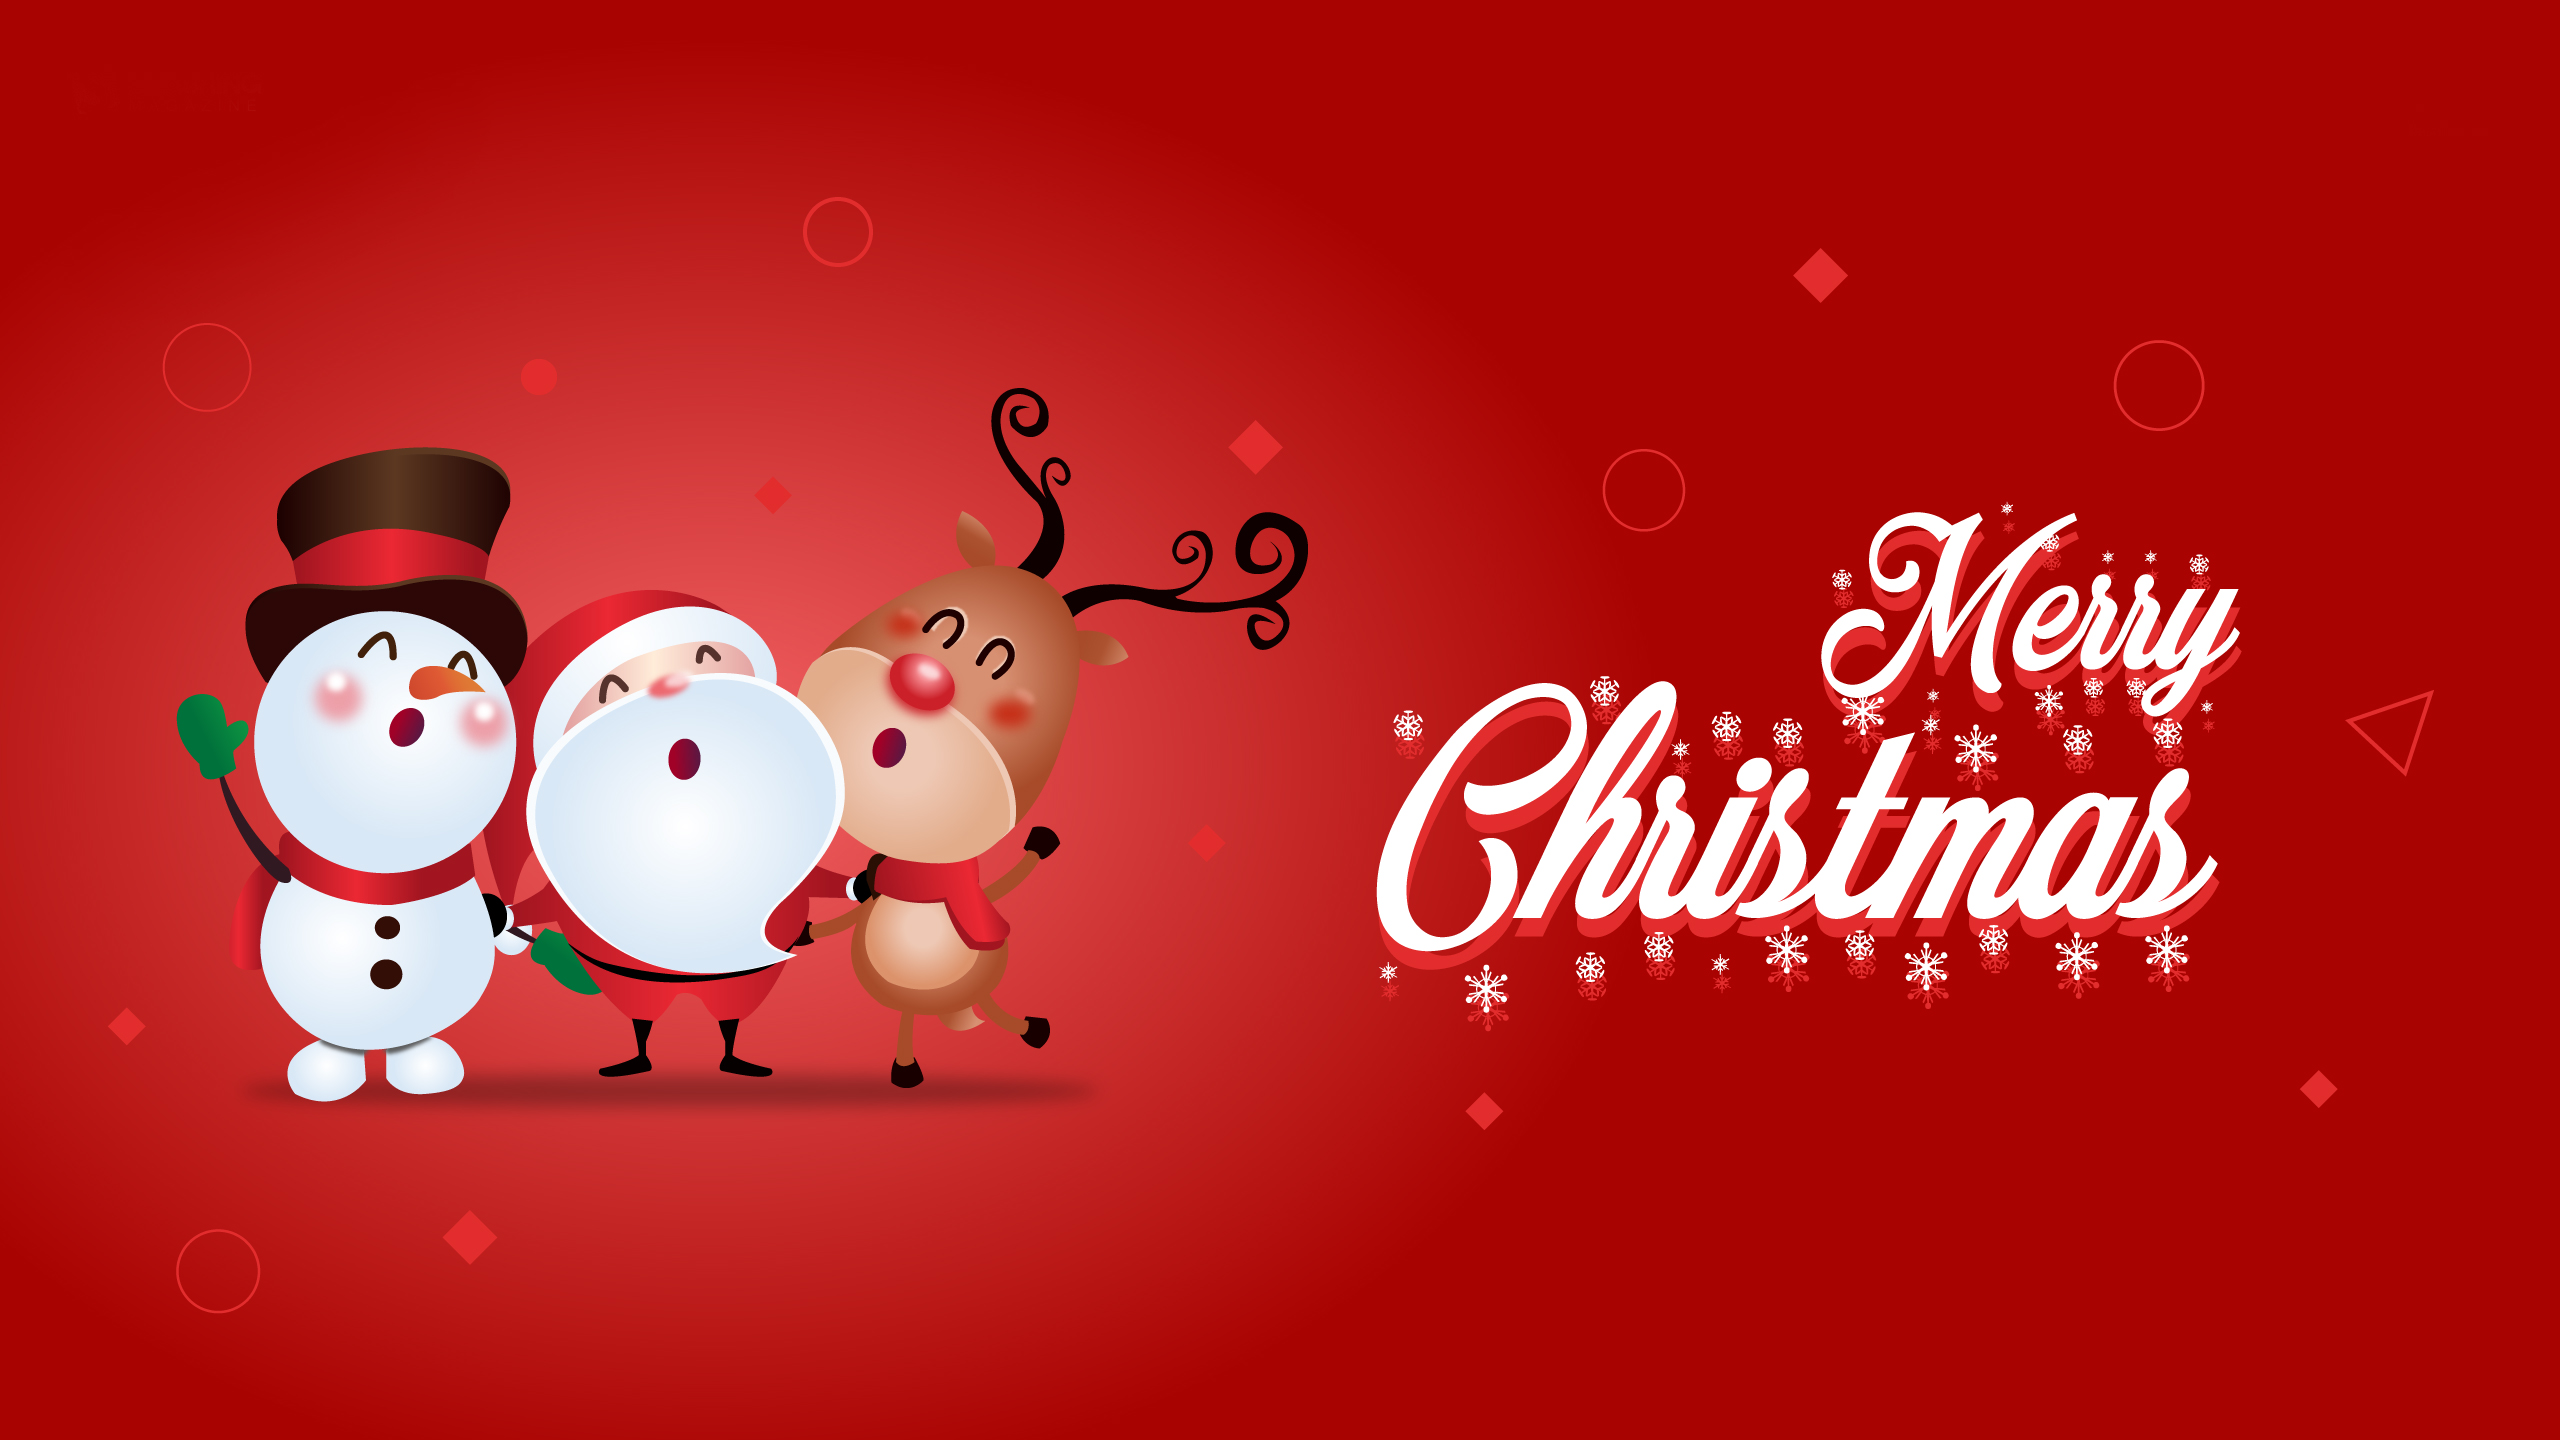 Merry Christmas Wallpaper - Merry Christmas Images With Snowman - HD Wallpaper 